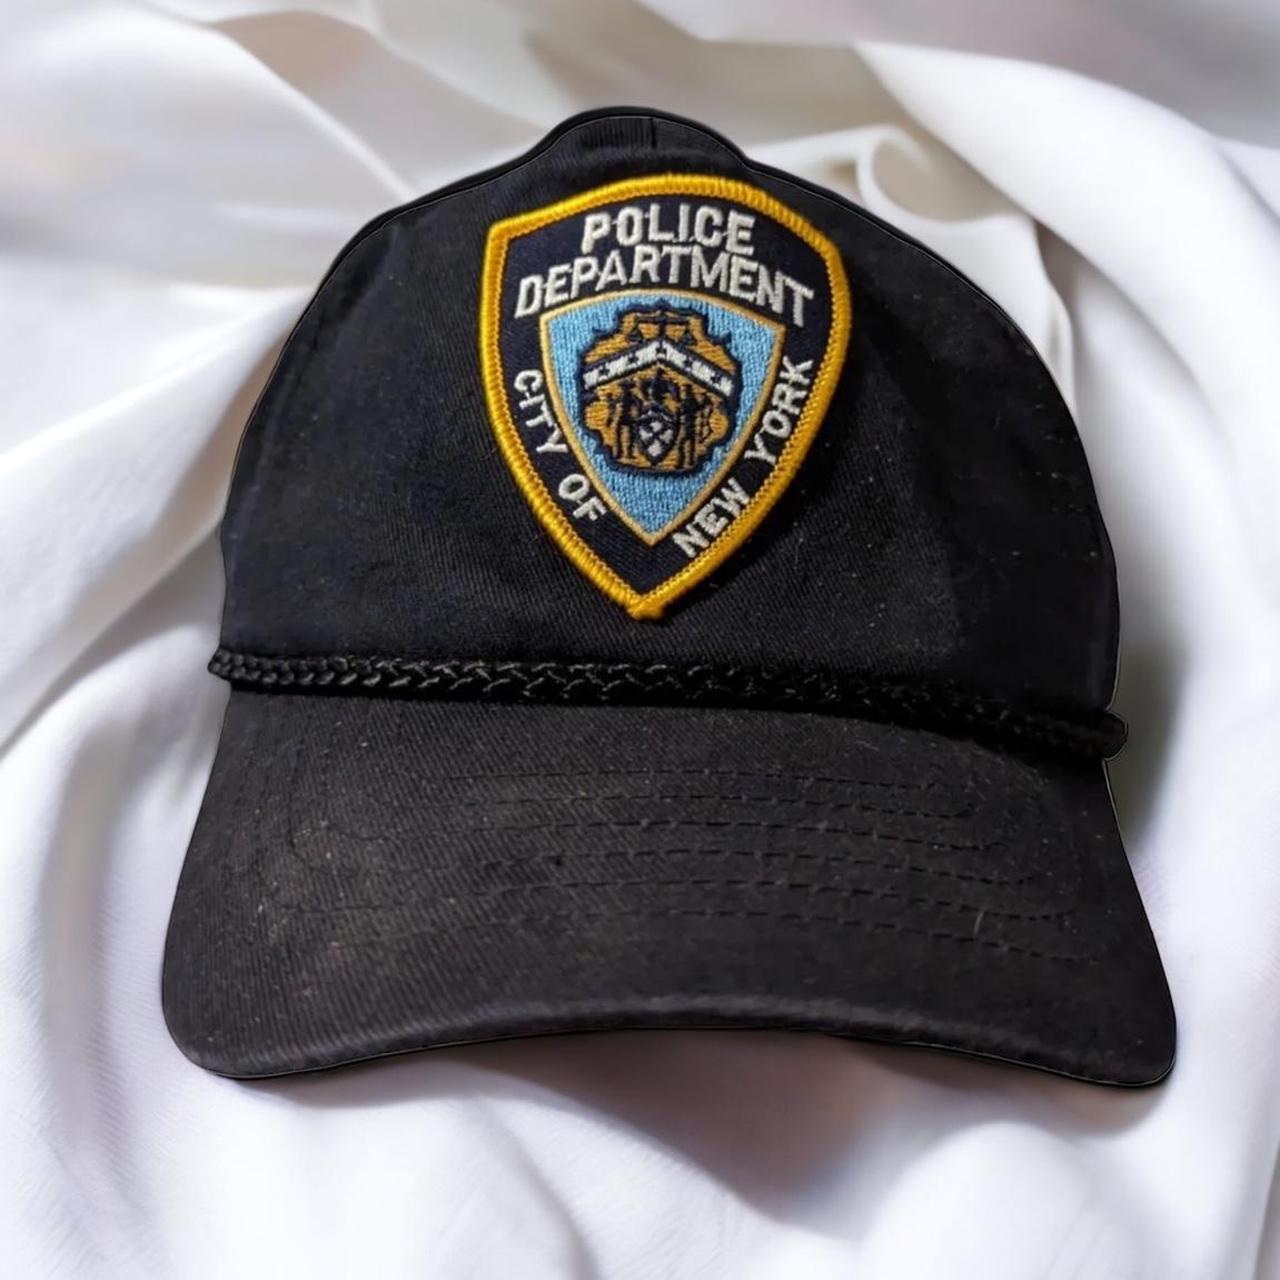 NYPD police department hat No fade great - Depop